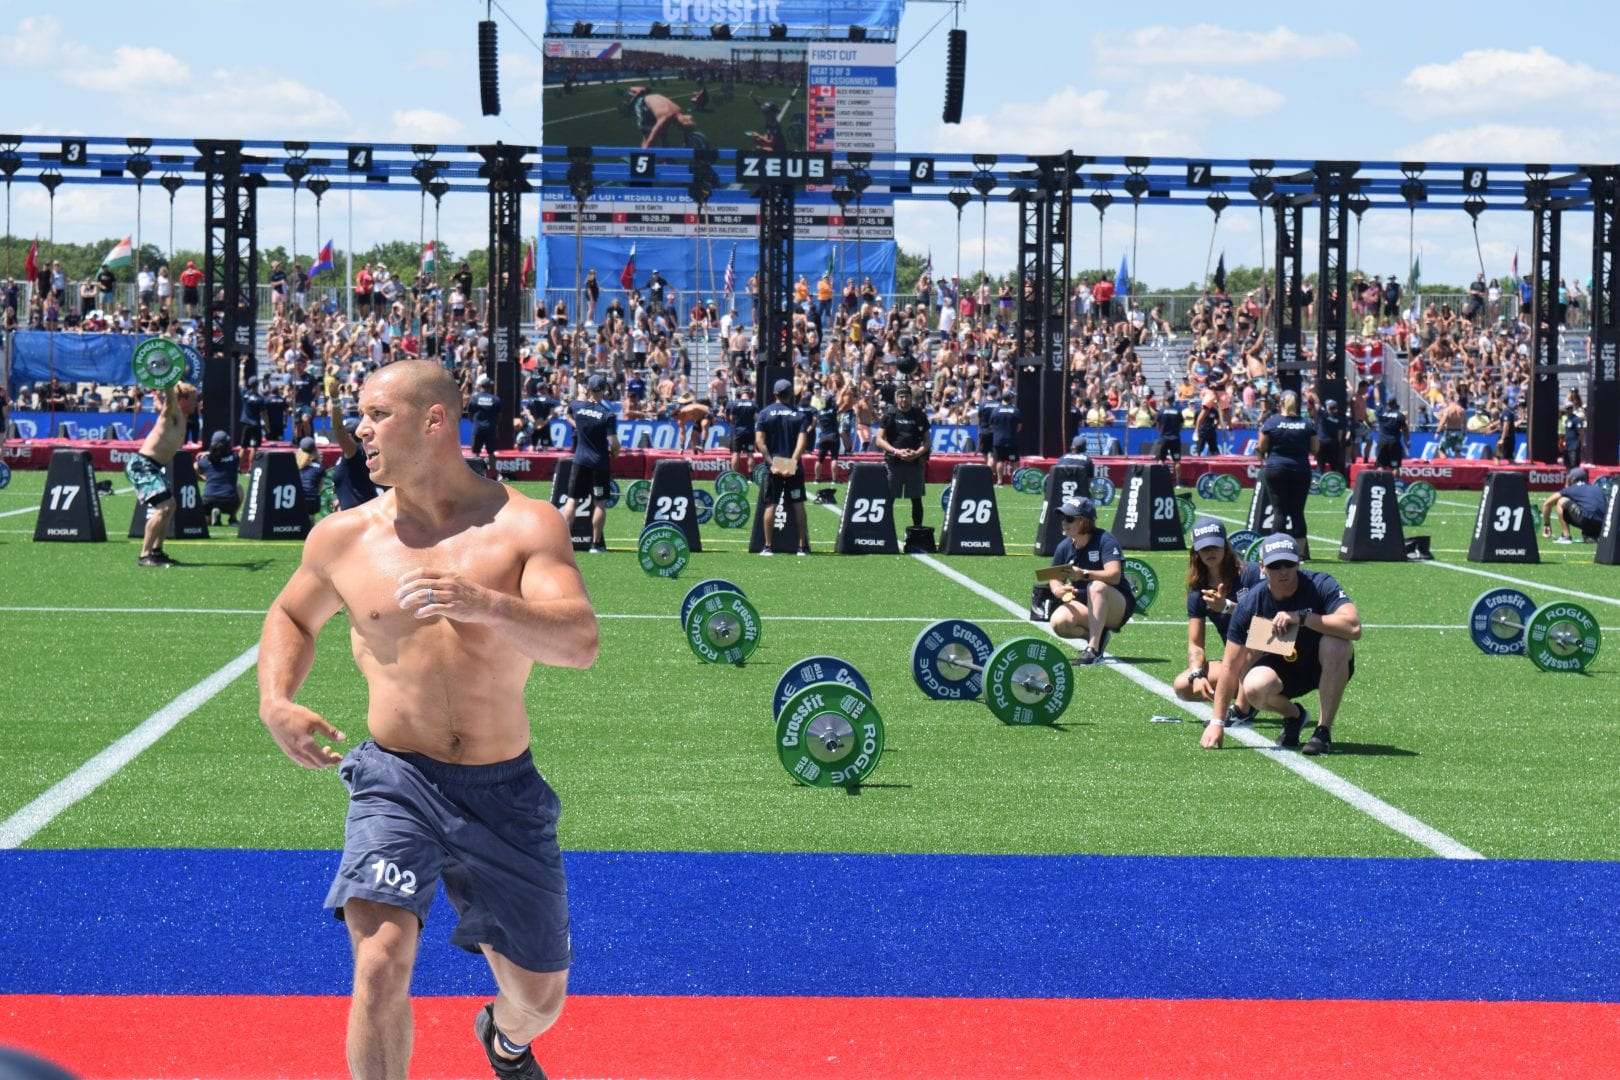 Cole Sager crosses the finish line during the first event of the 2019 CrossFit Games